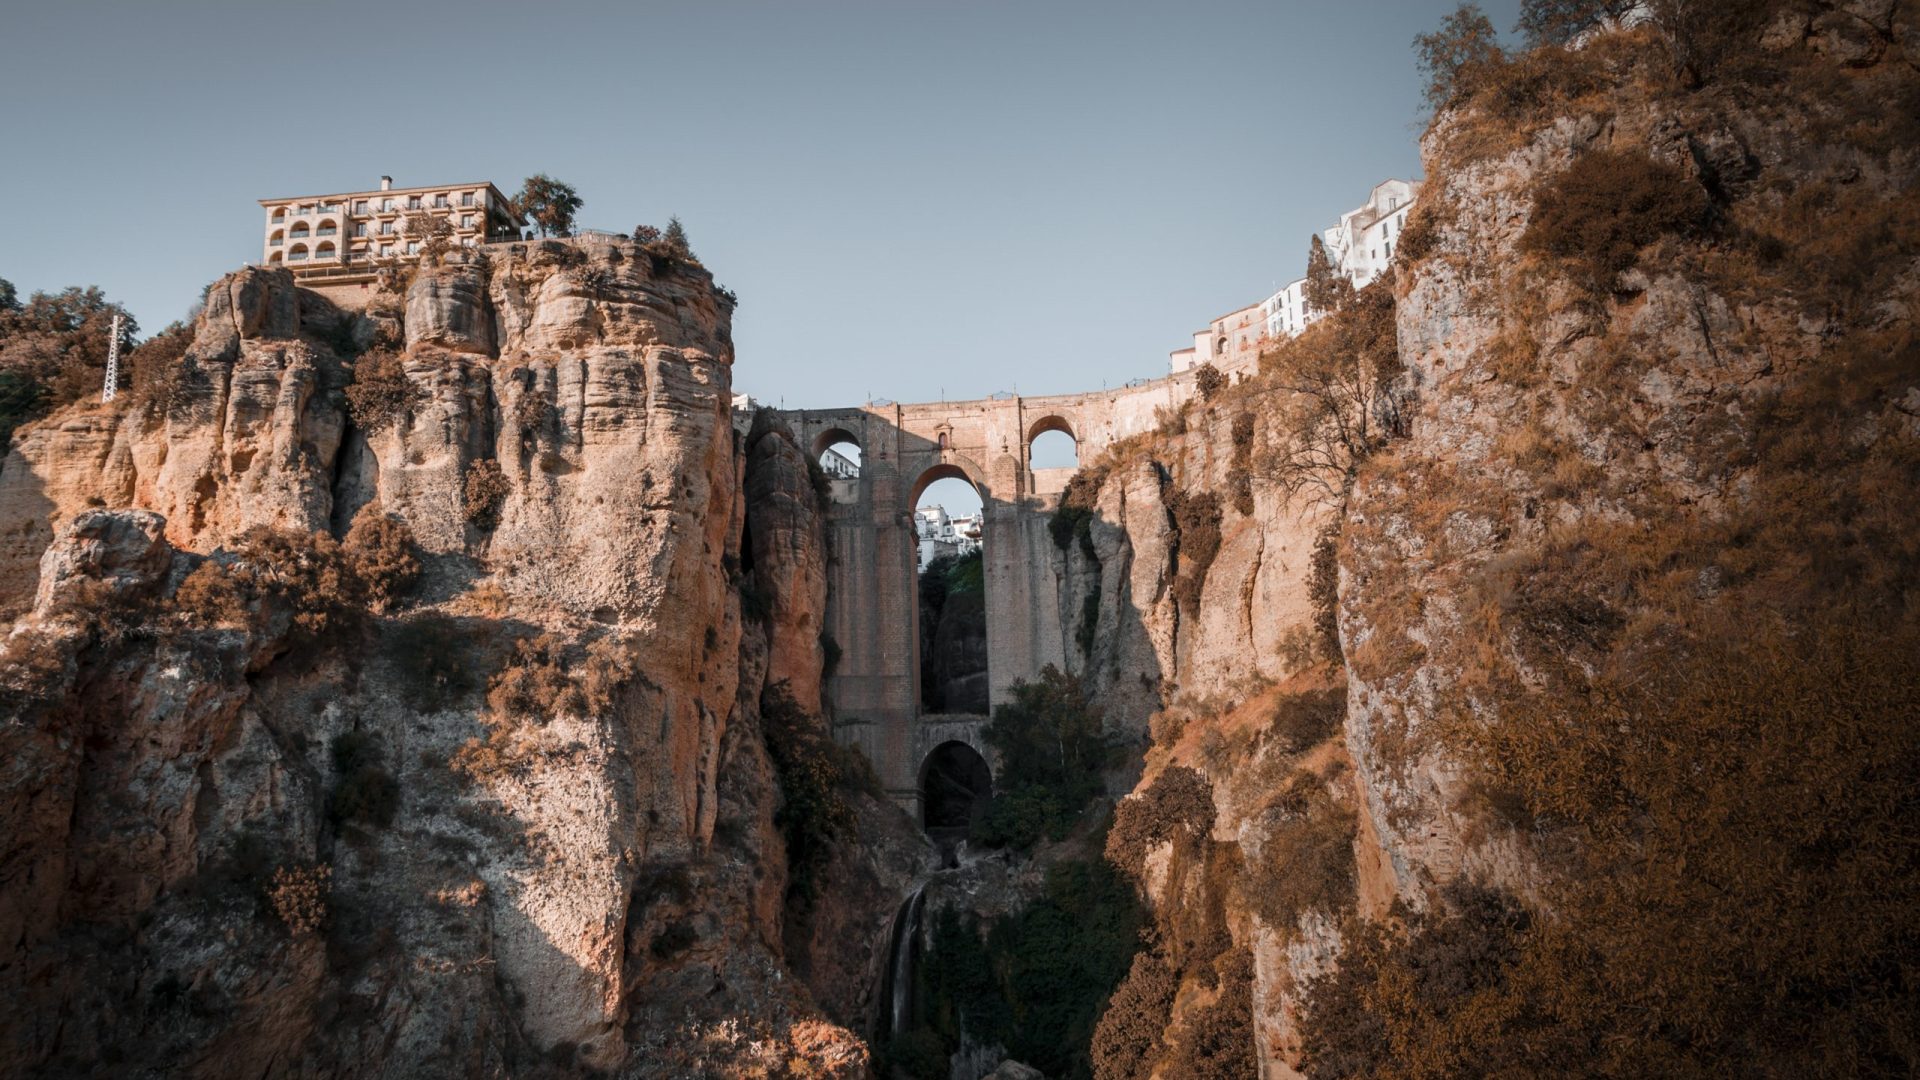 Photograph of the New Bridge located in Ronda, Andalucia, Spain.